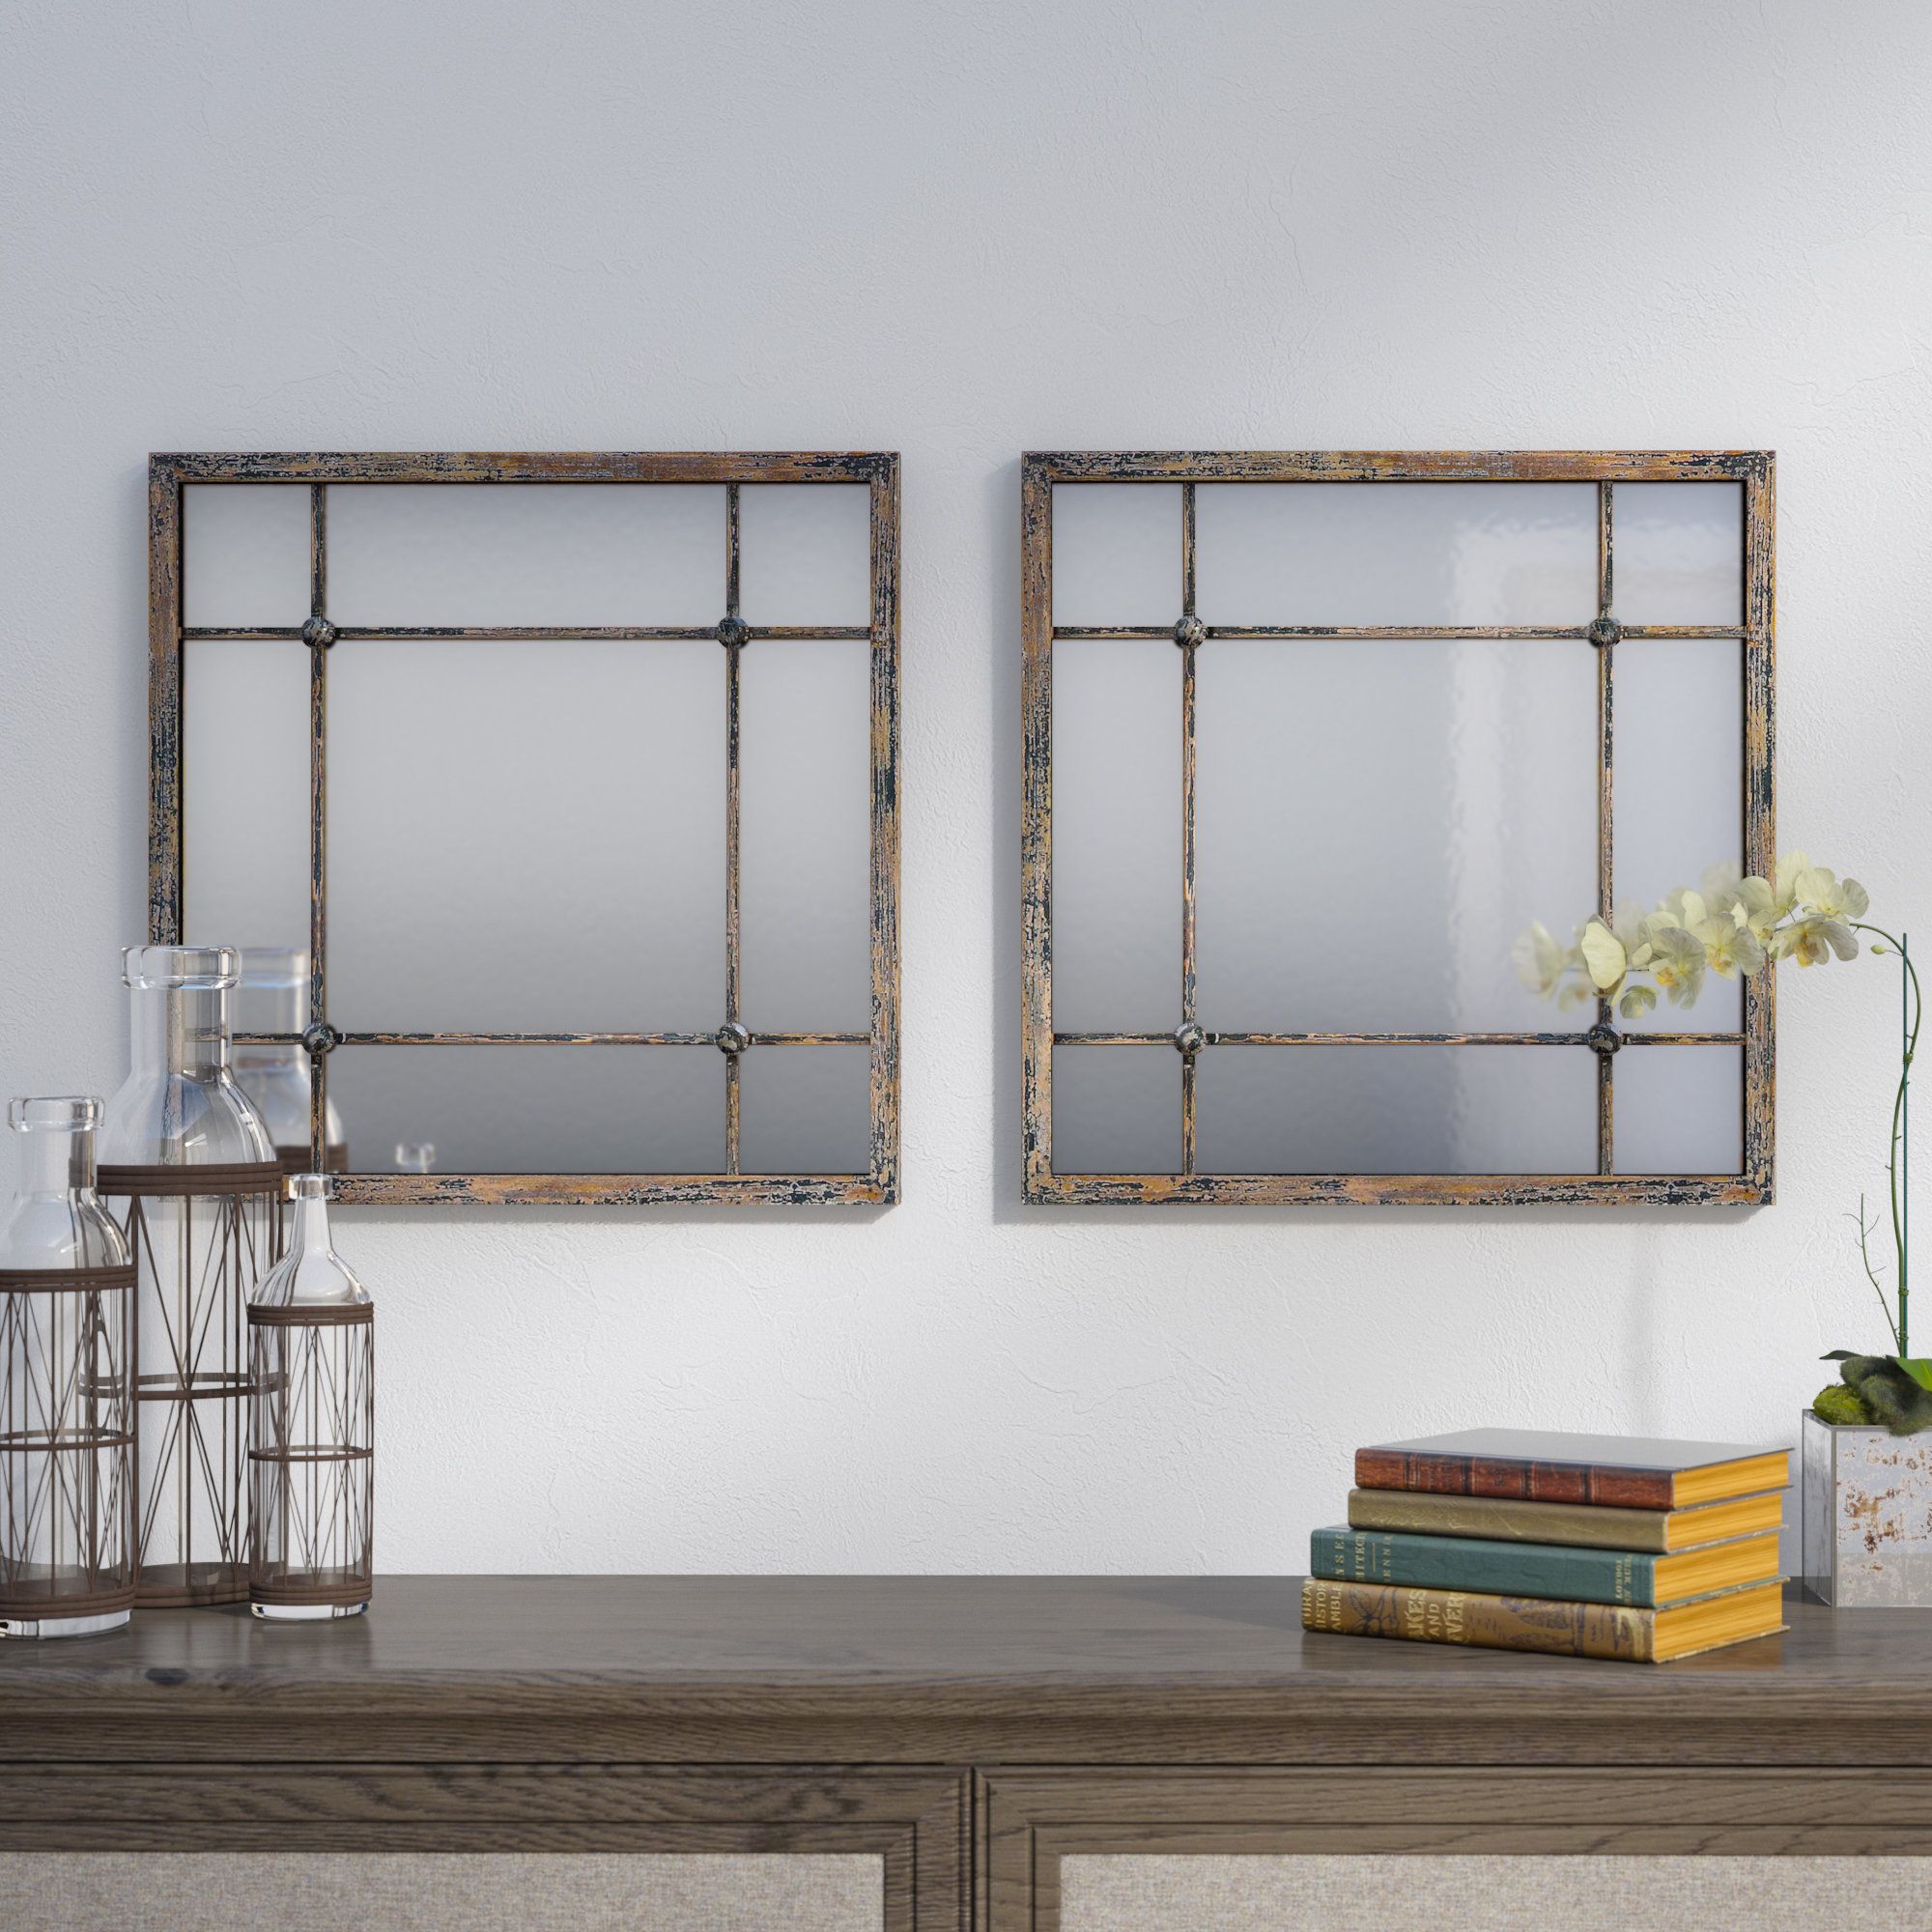 2 Piece Priscilla Square Traditional Beveled Distressed Accent Mirror Set With Regard To 2 Piece Priscilla Square Traditional Beveled Distressed Accent Mirror Sets (View 1 of 20)